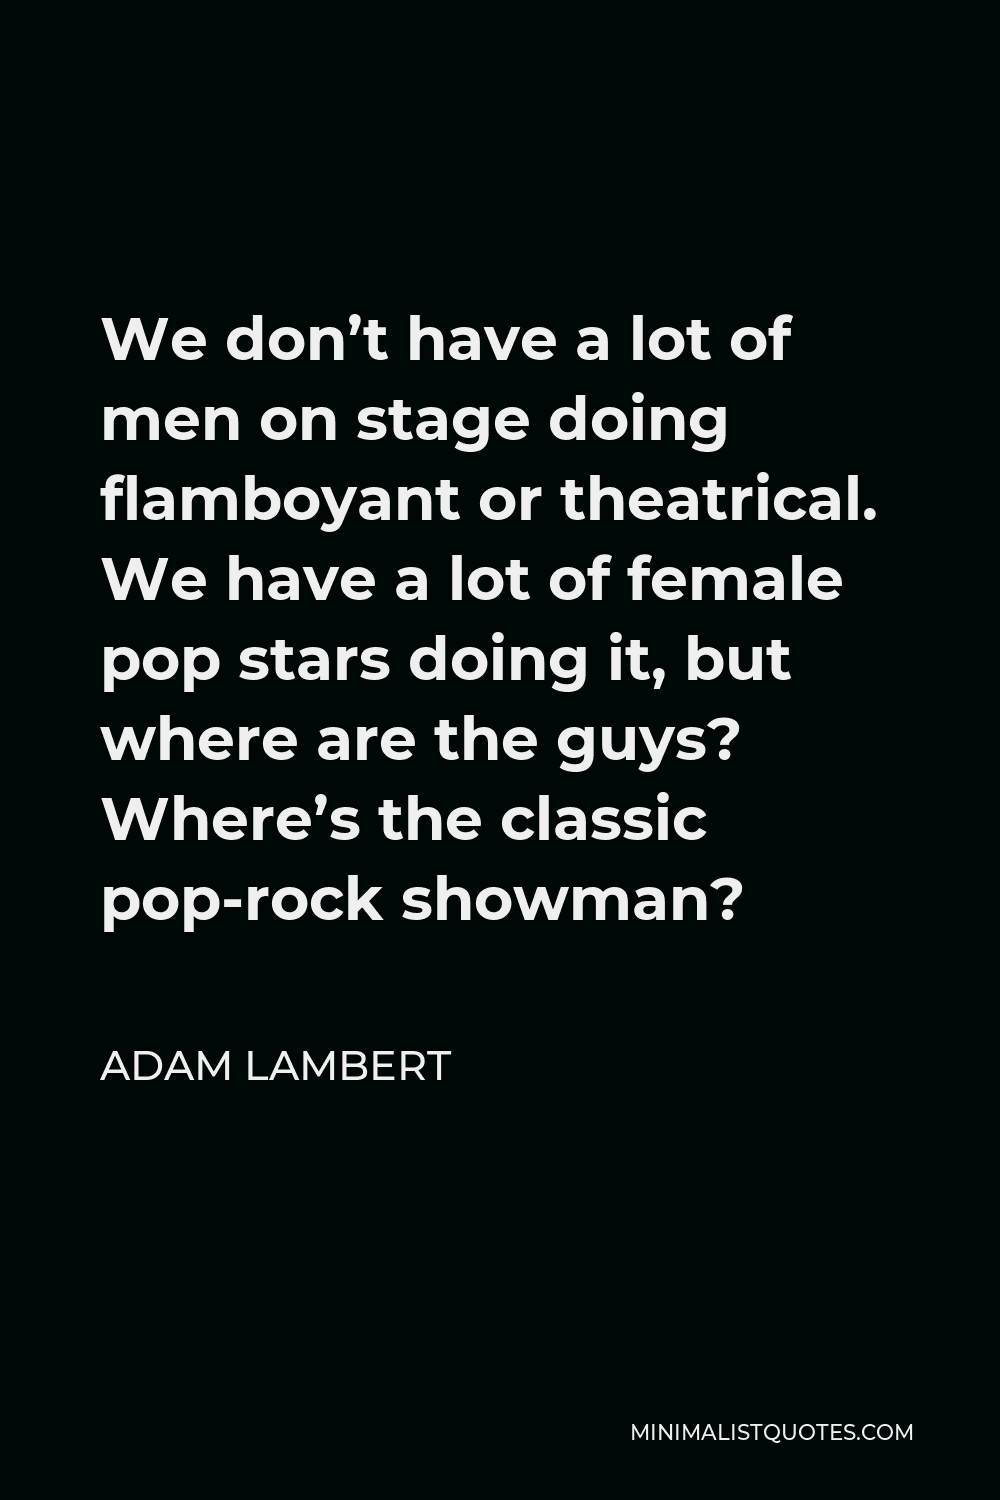 Adam Lambert Quote - We don’t have a lot of men on stage doing flamboyant or theatrical. We have a lot of female pop stars doing it, but where are the guys? Where’s the classic pop-rock showman?